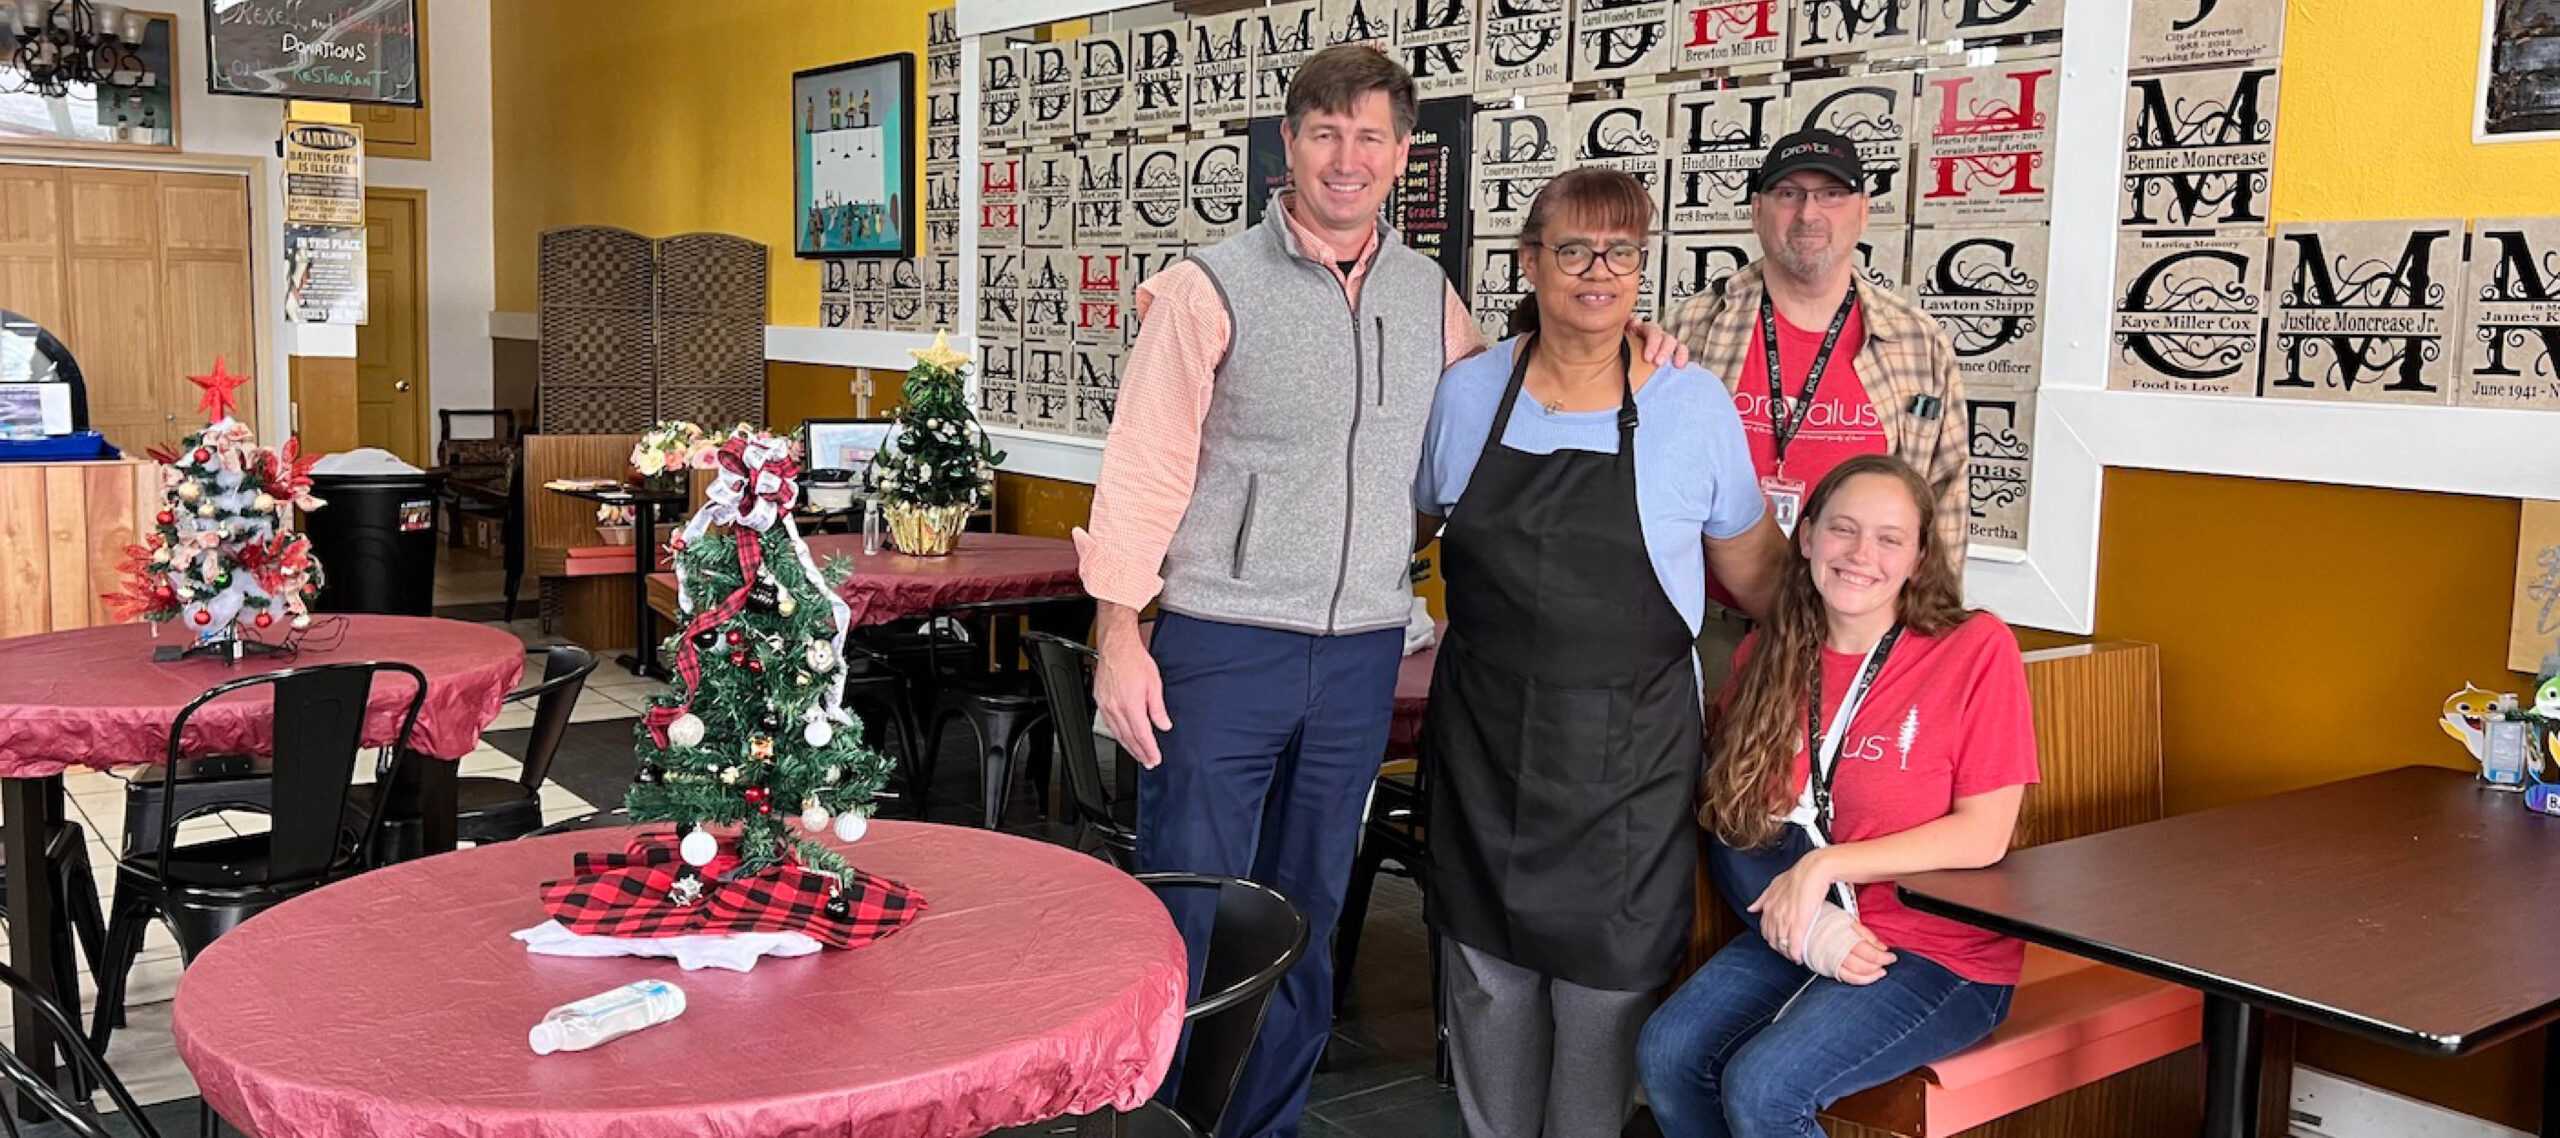 provalus the tgb foundation optomi professional services volunteering christmas donation trees drexell and honeybee’s restaurant together feature